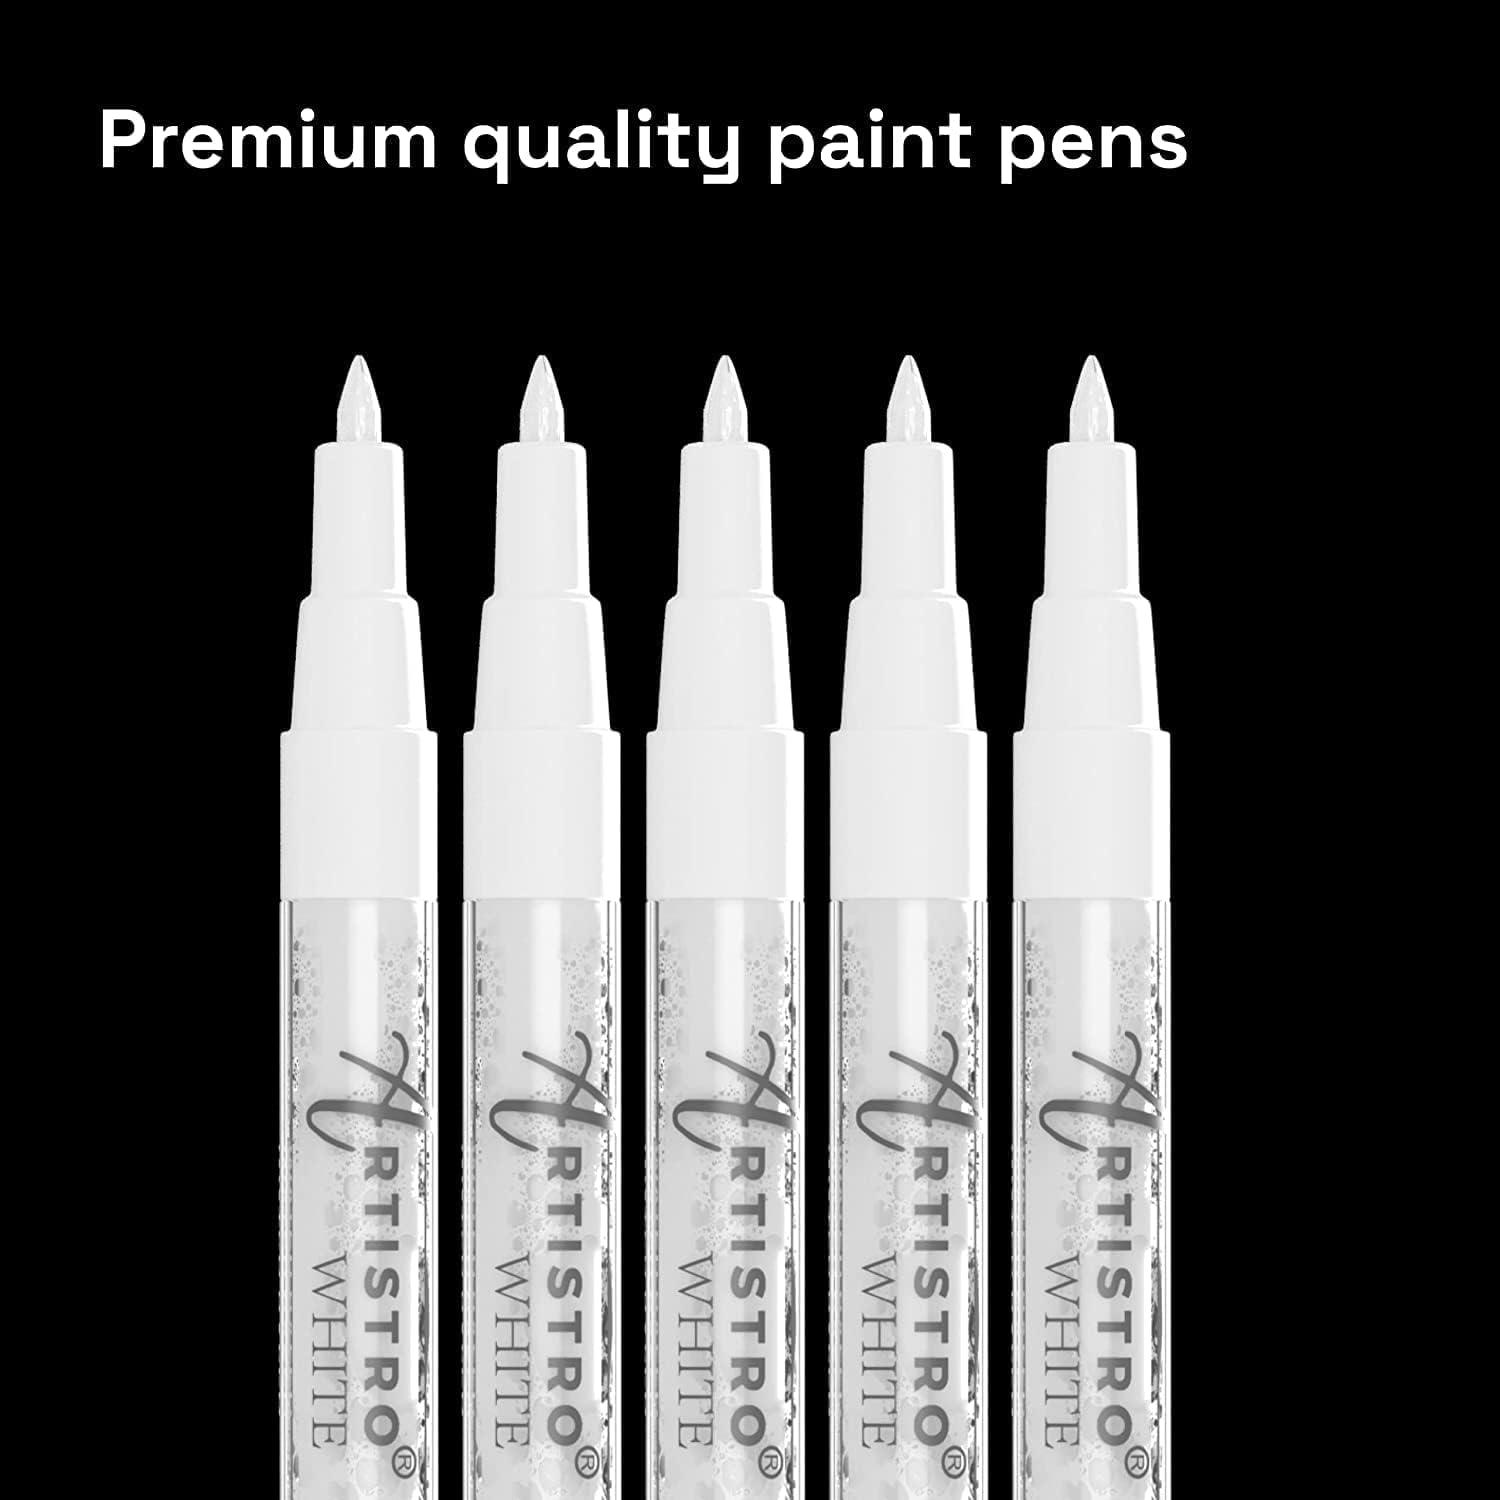 ARTISTRO White Paint Pen for Rock Painting Stone Ceramic Glass Wood Tire  Fabric Metal Canvas. Set of 5 Acrylic Paint White Marker Water-based  Extra-fine Tip 5 White Extra-Fine